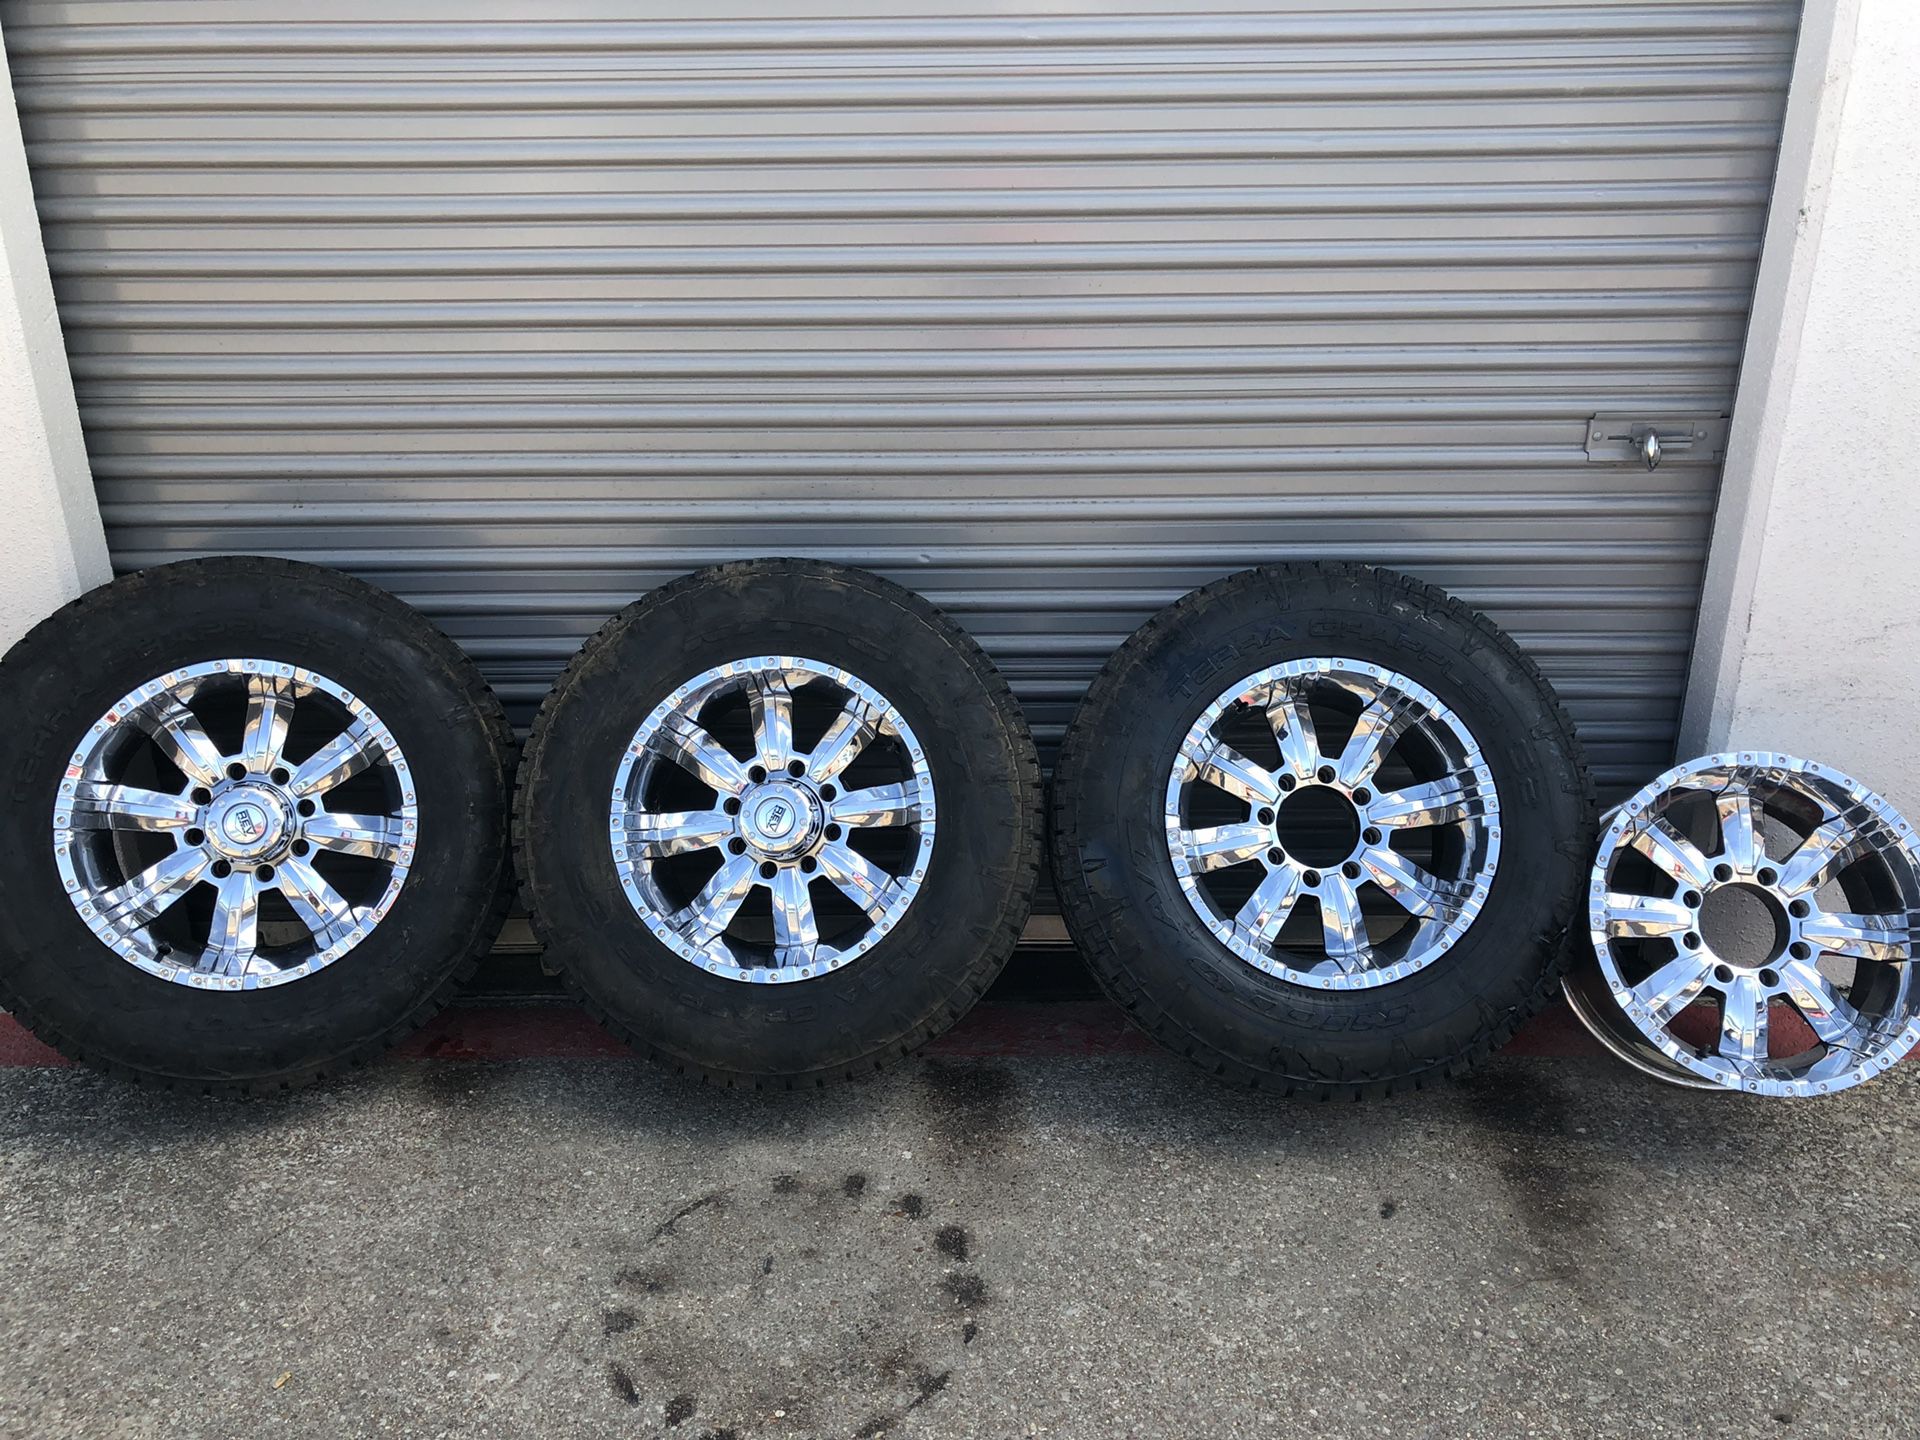 18” Chrome rims with tires